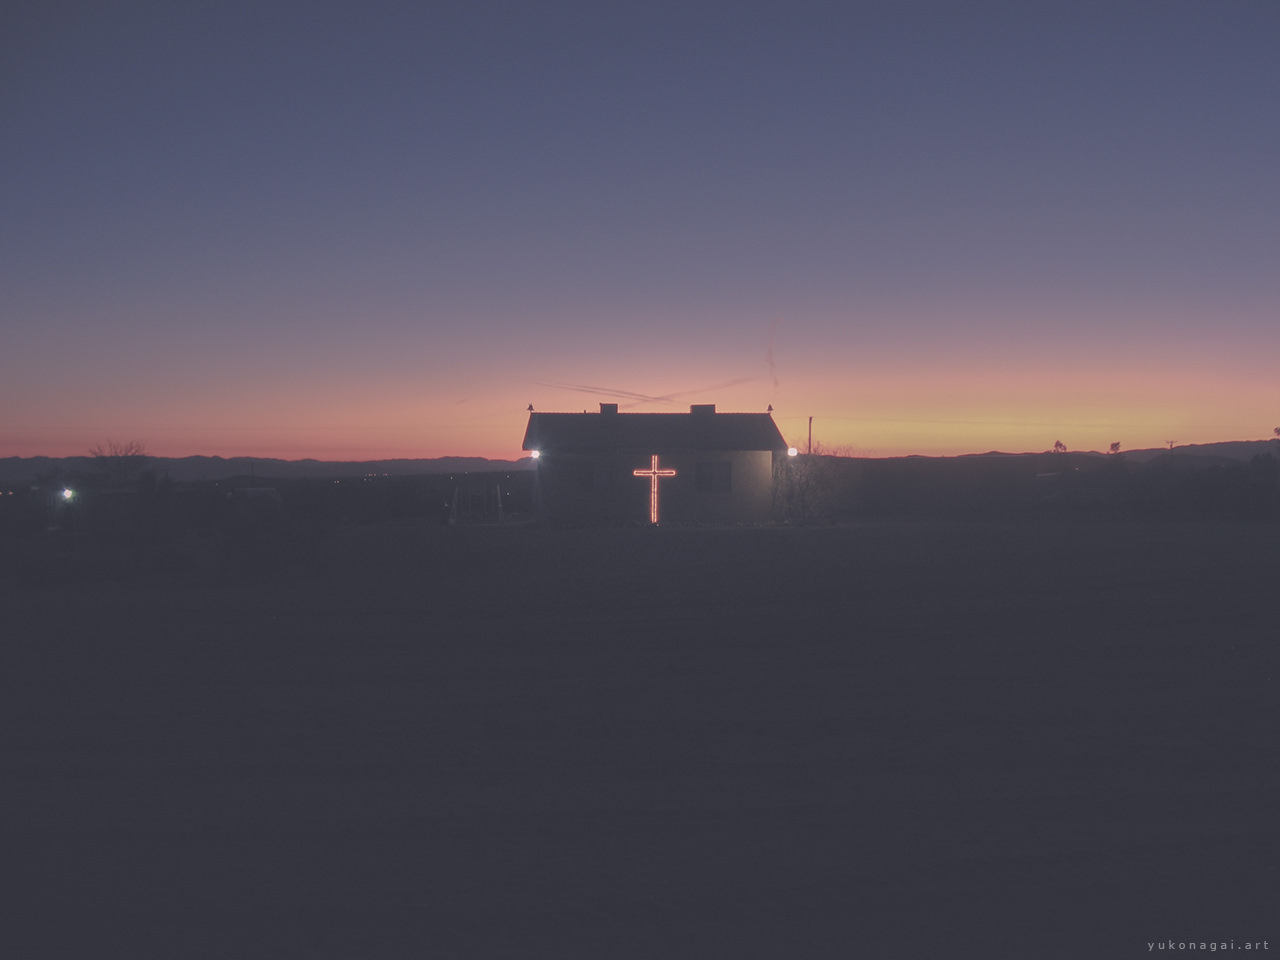 A small church with a lit cross at sunrise.